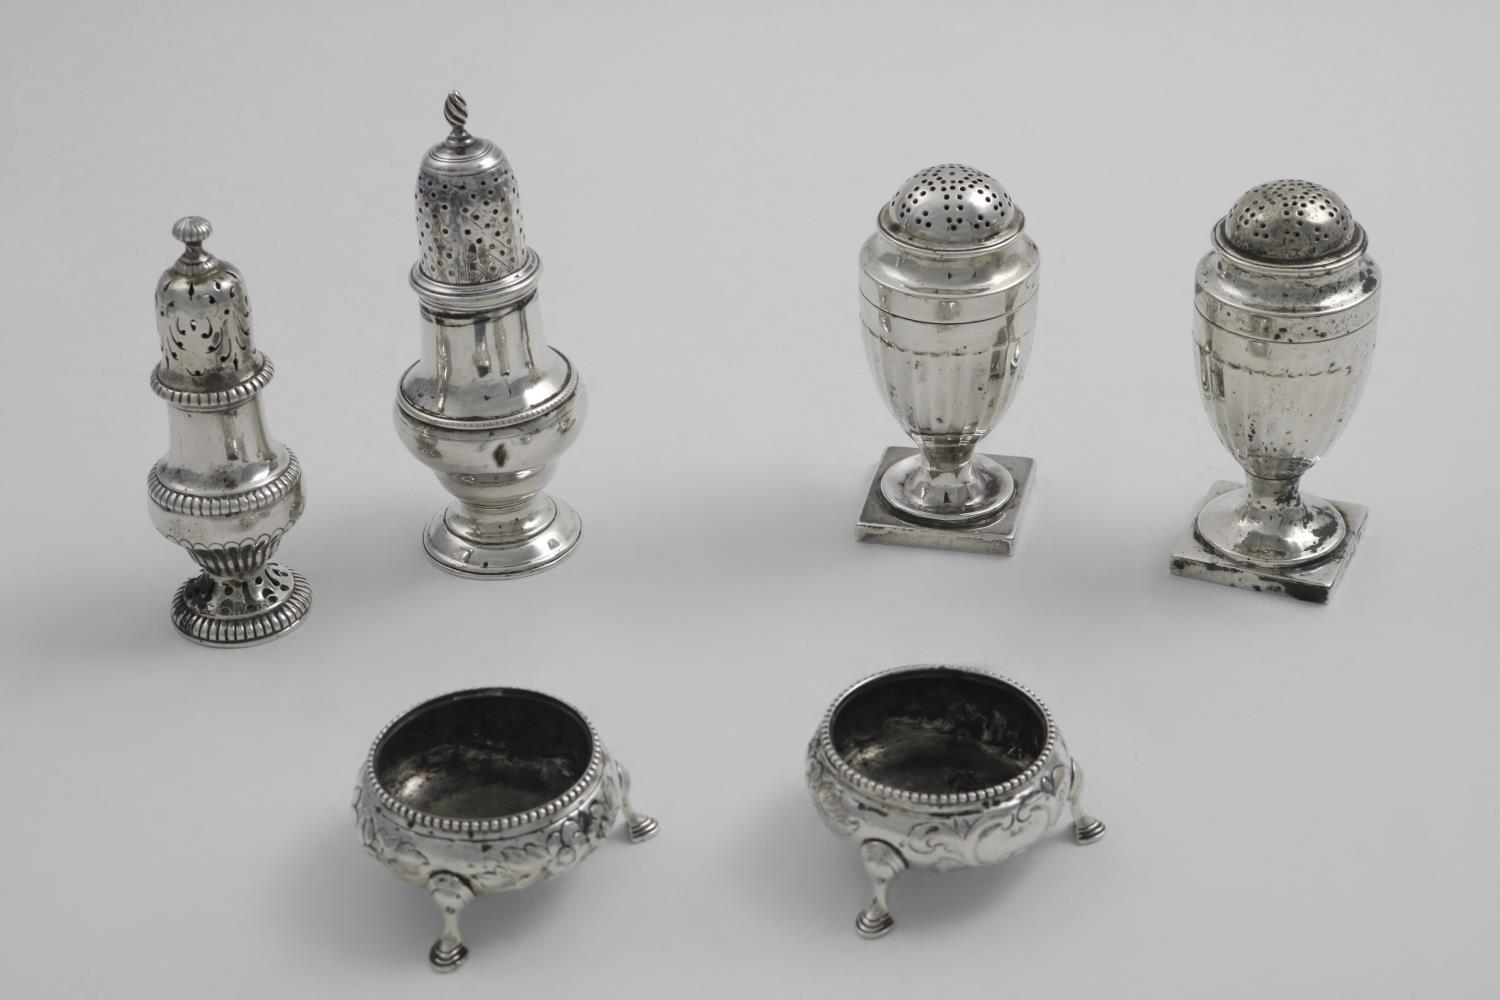 A PAIR OF GEORGE III VASE-SHAPED PEPPER CASTERS with bun covers and pedestal bases, by Peter &